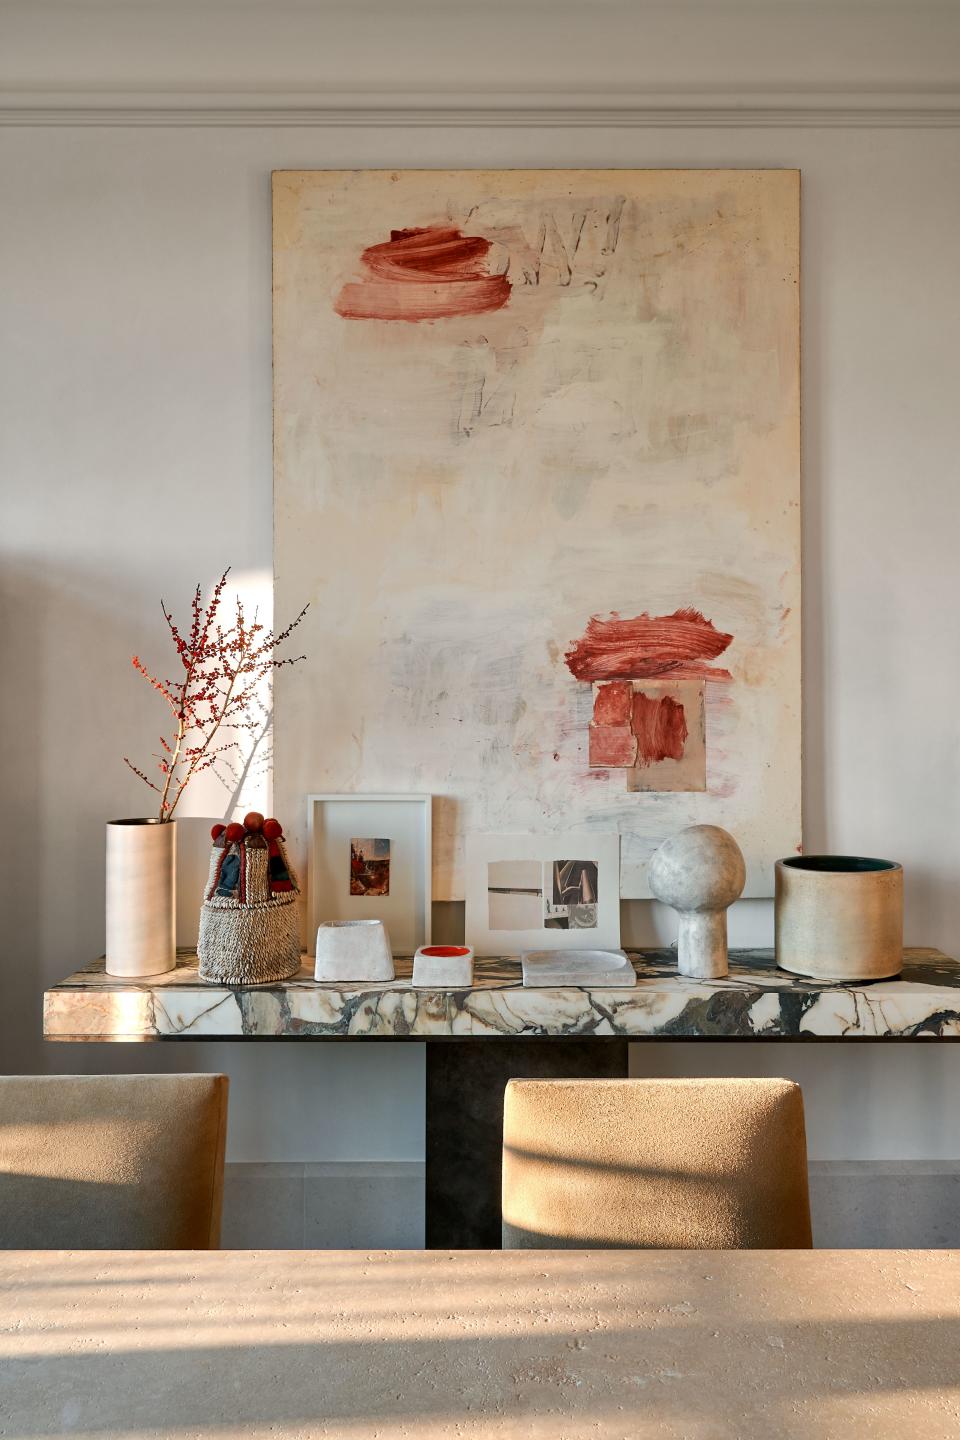 A Breccia Stazzema marble-and-brass console by Dirand is topped with pieces by Robert Rauschenberg, Georges Jouve, Adrien Dirand, and André Borderie. Lawrence Carroll painting.